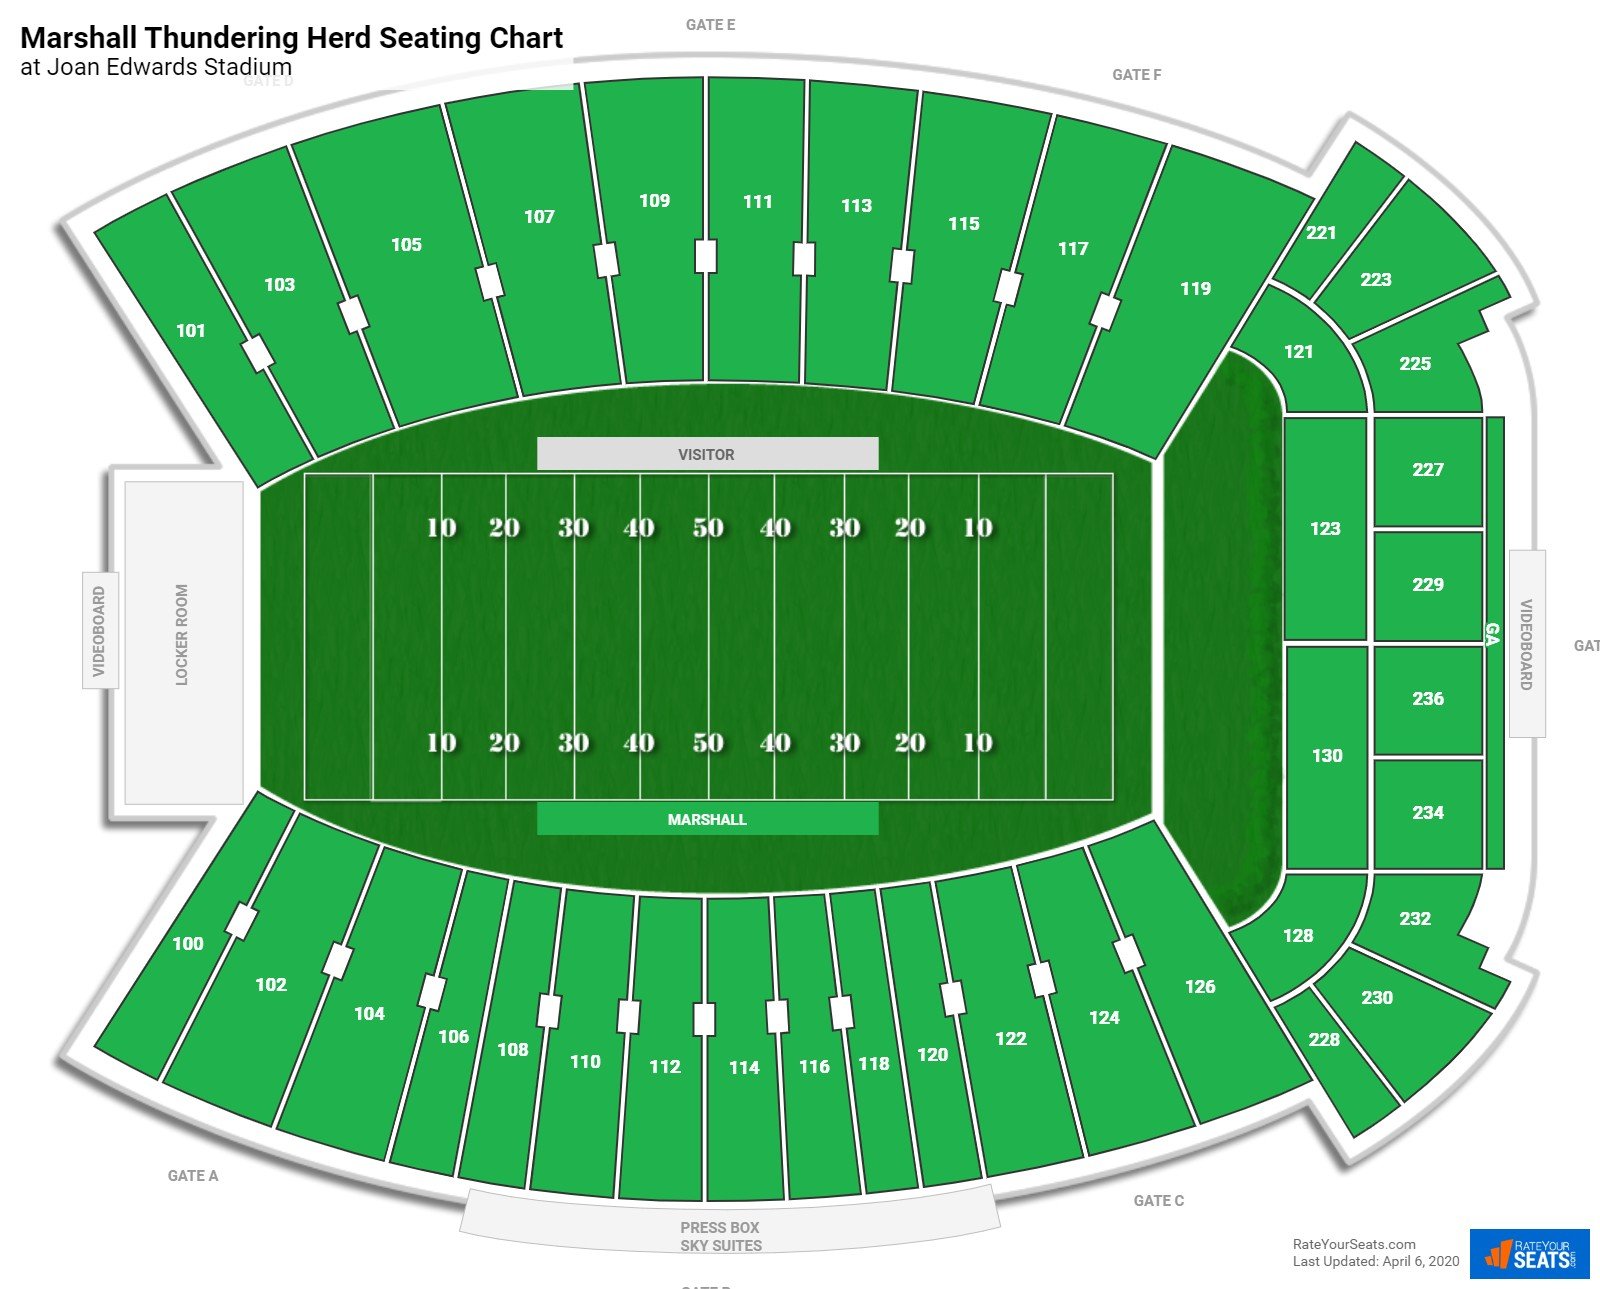 Joan Edwards Stadium Seating Charts - RateYourSeats.com See various example...